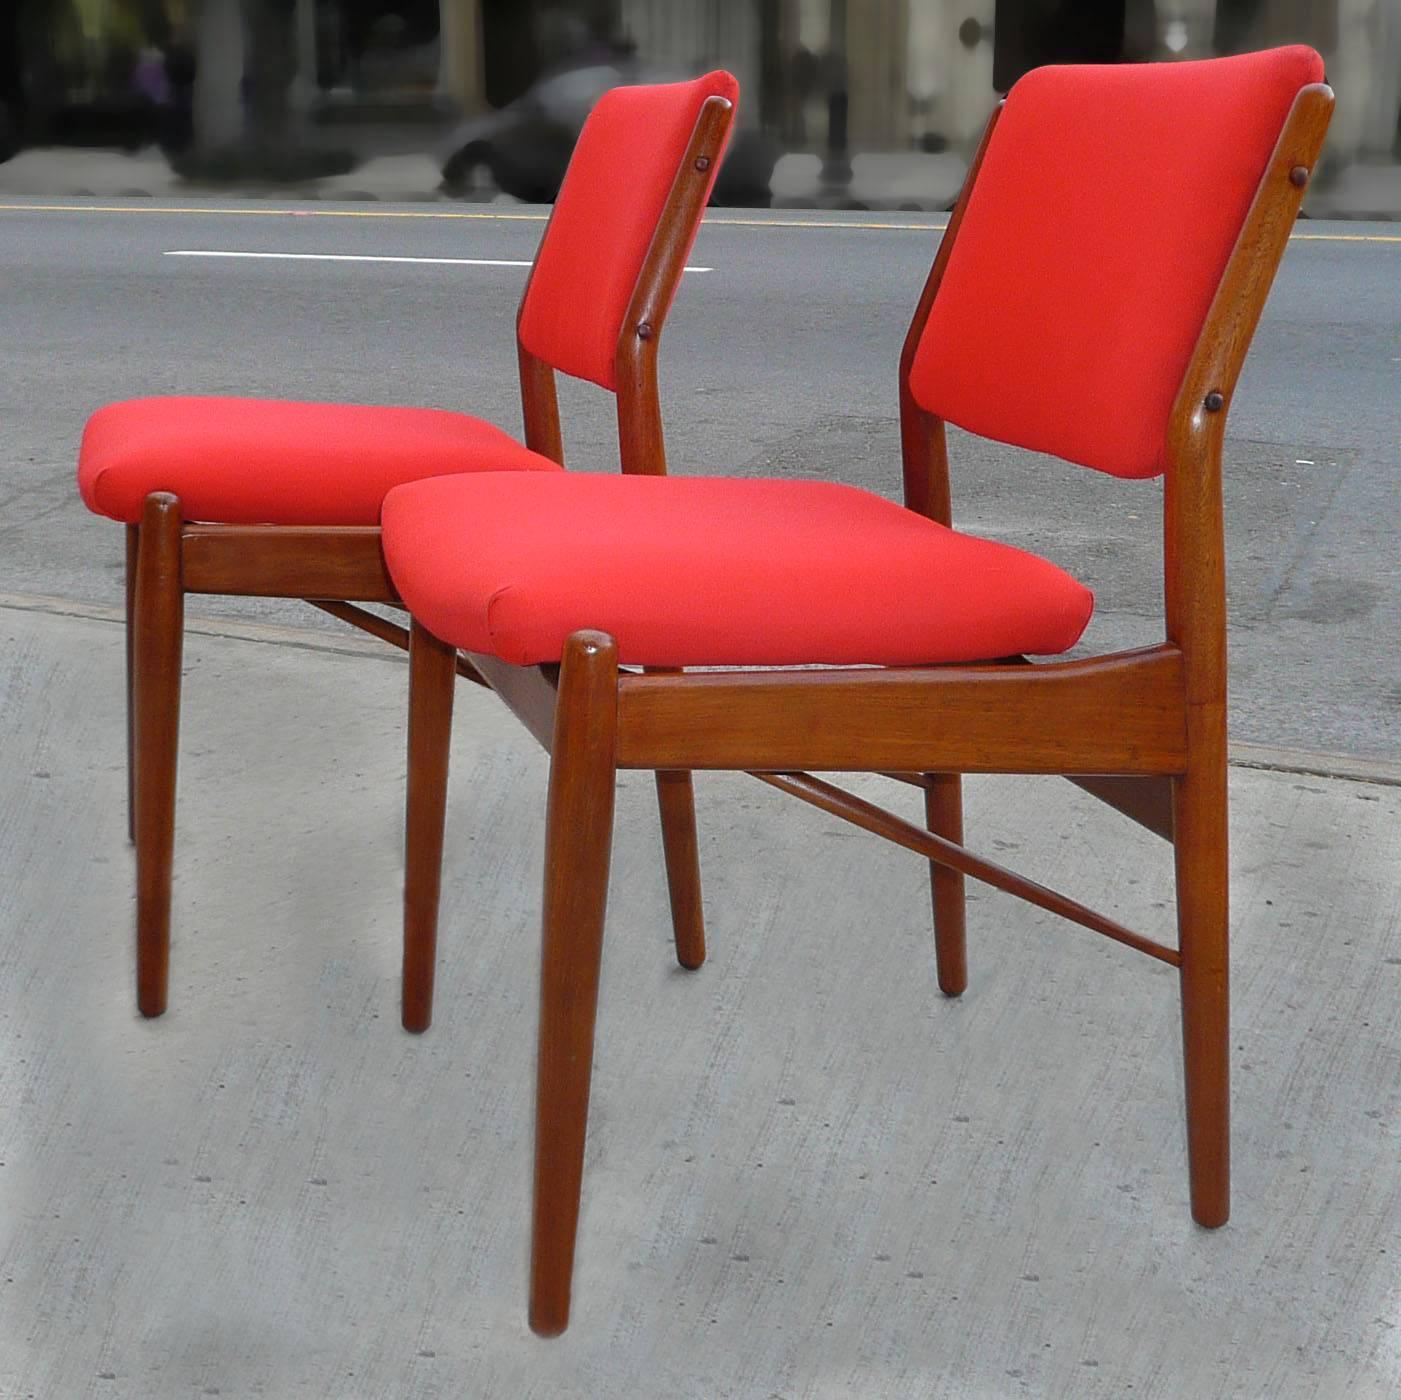 Set of 4 teak, Danish modern dining chairs by Arne Vodder for Sibast Mobler are newly refinished and are at present stripped of their shown upholstery awaiting your own.